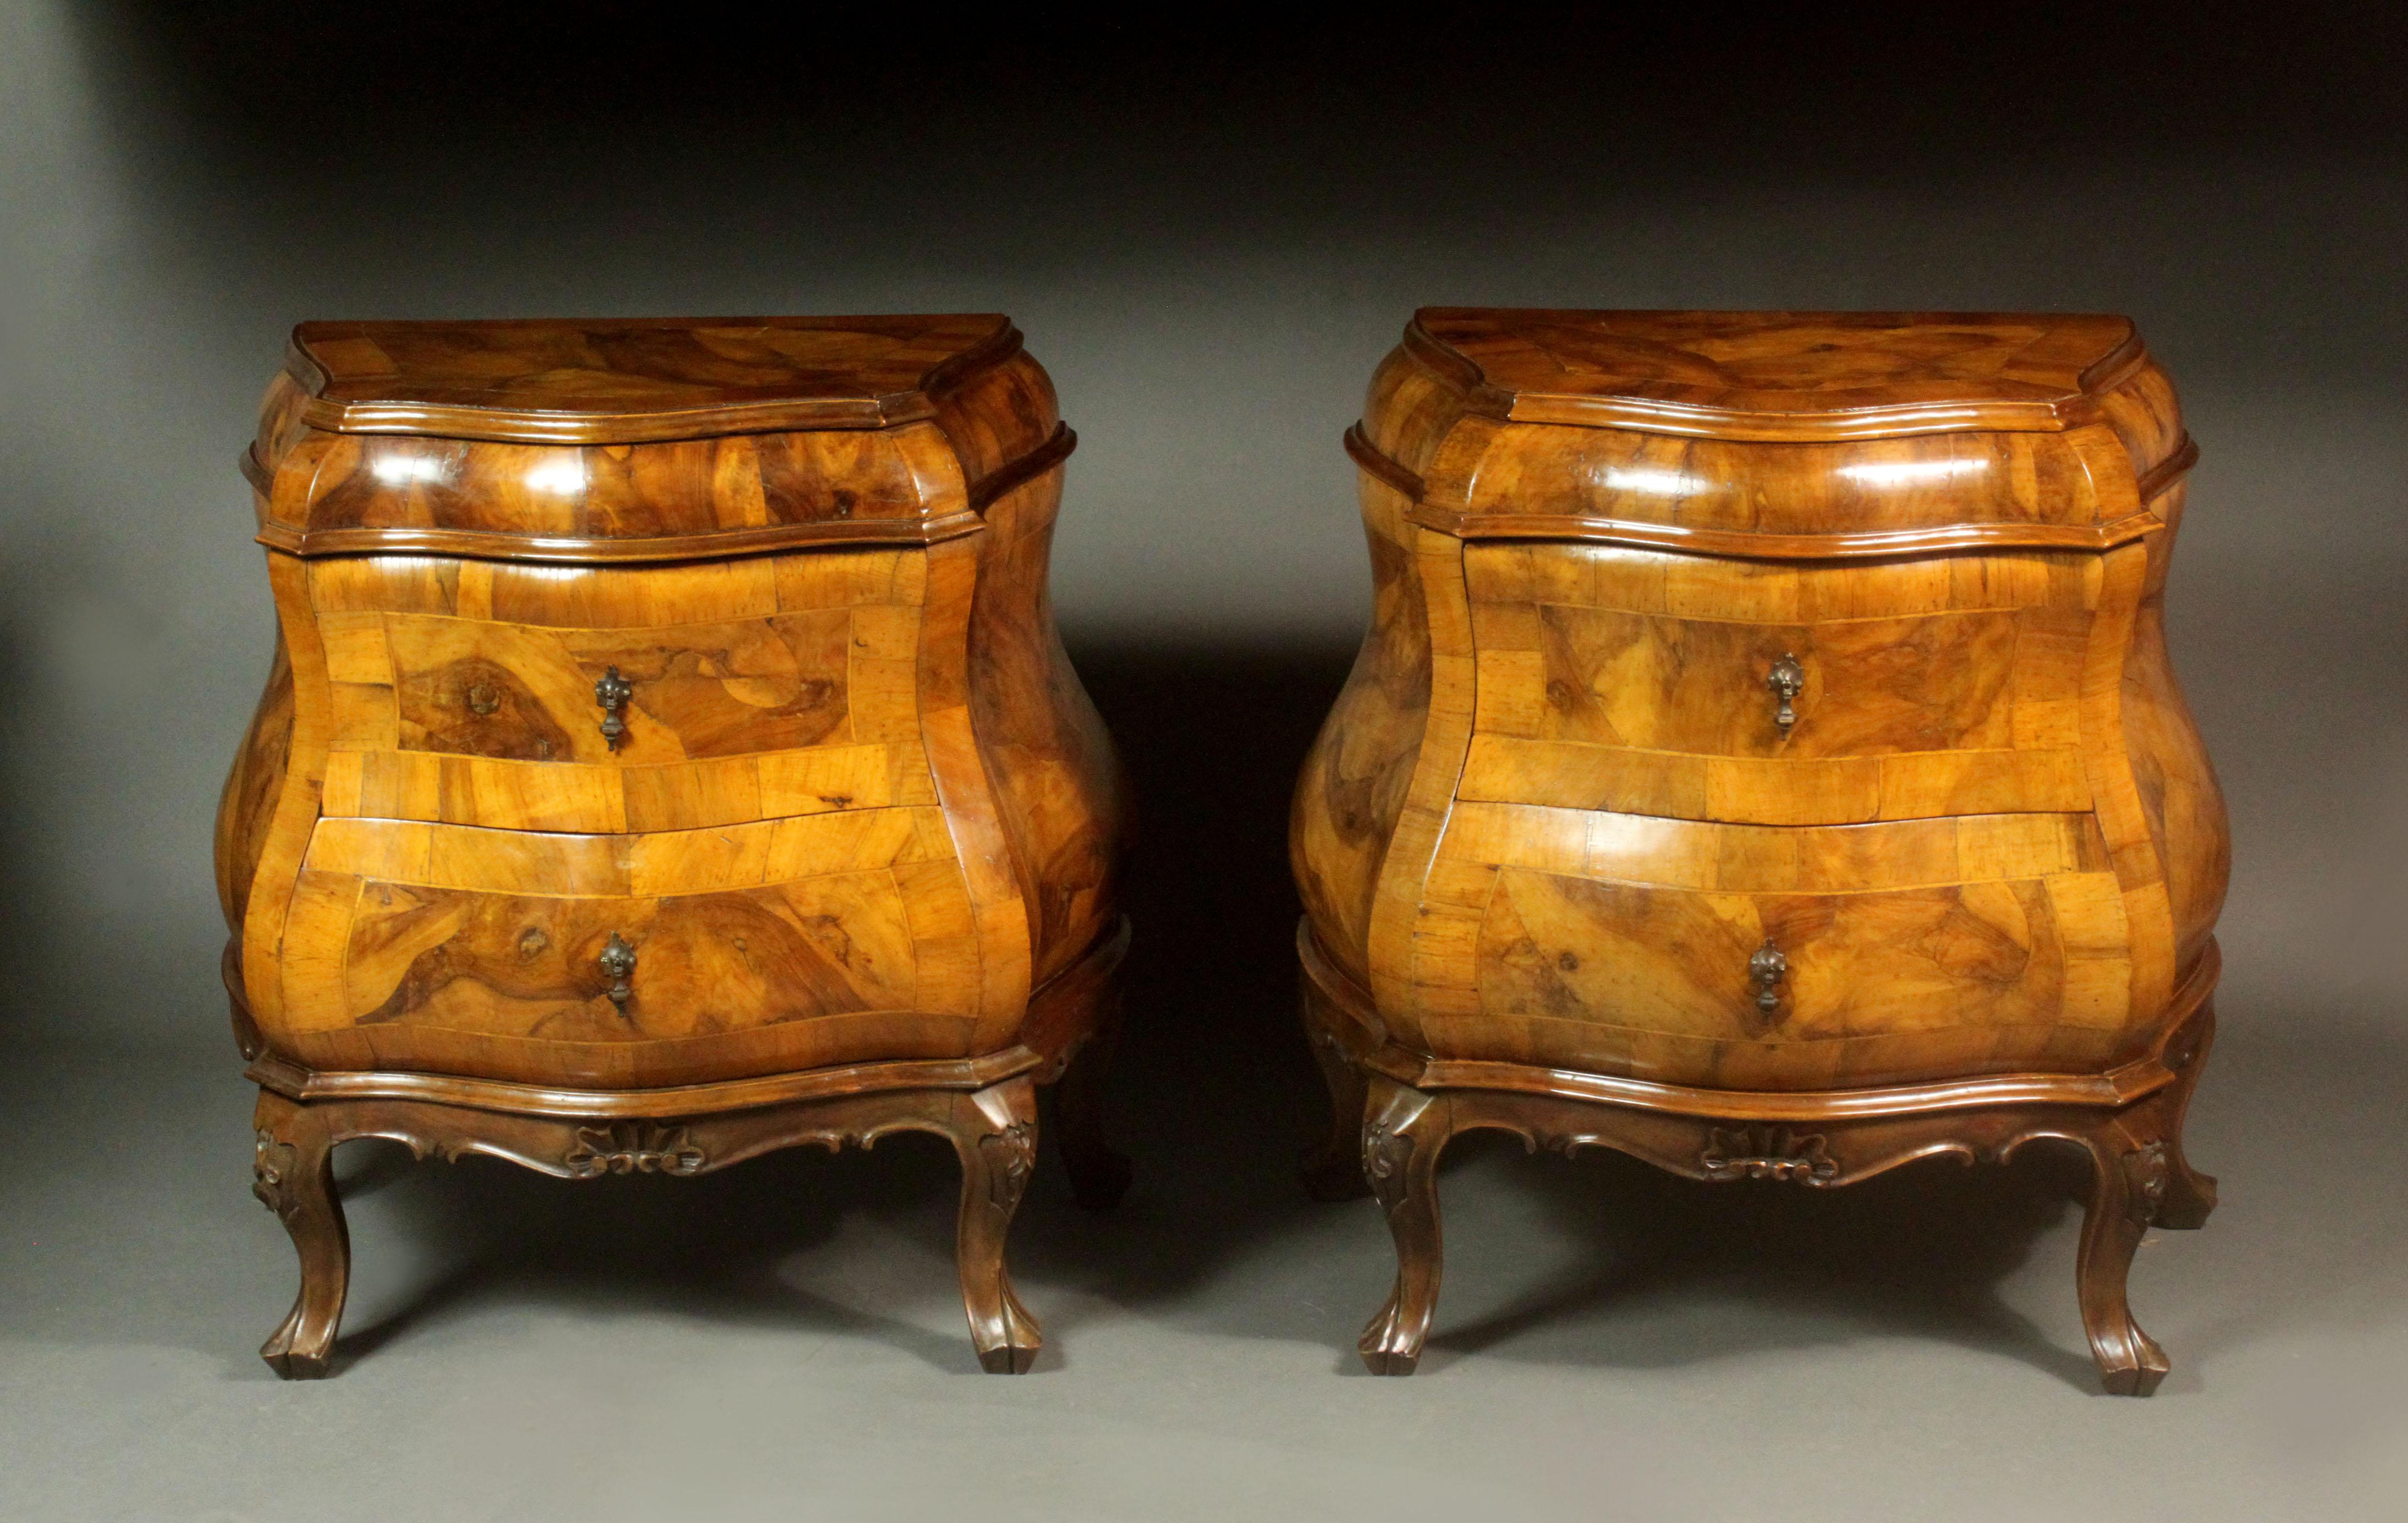 An unusual pair of late 18th century style bombay front bedside chests in veneered walnut of a good colour.  Each has two drawers with the original drop handles and the top does not open upwards, it is fixed. Well carved small cabriole legs with a